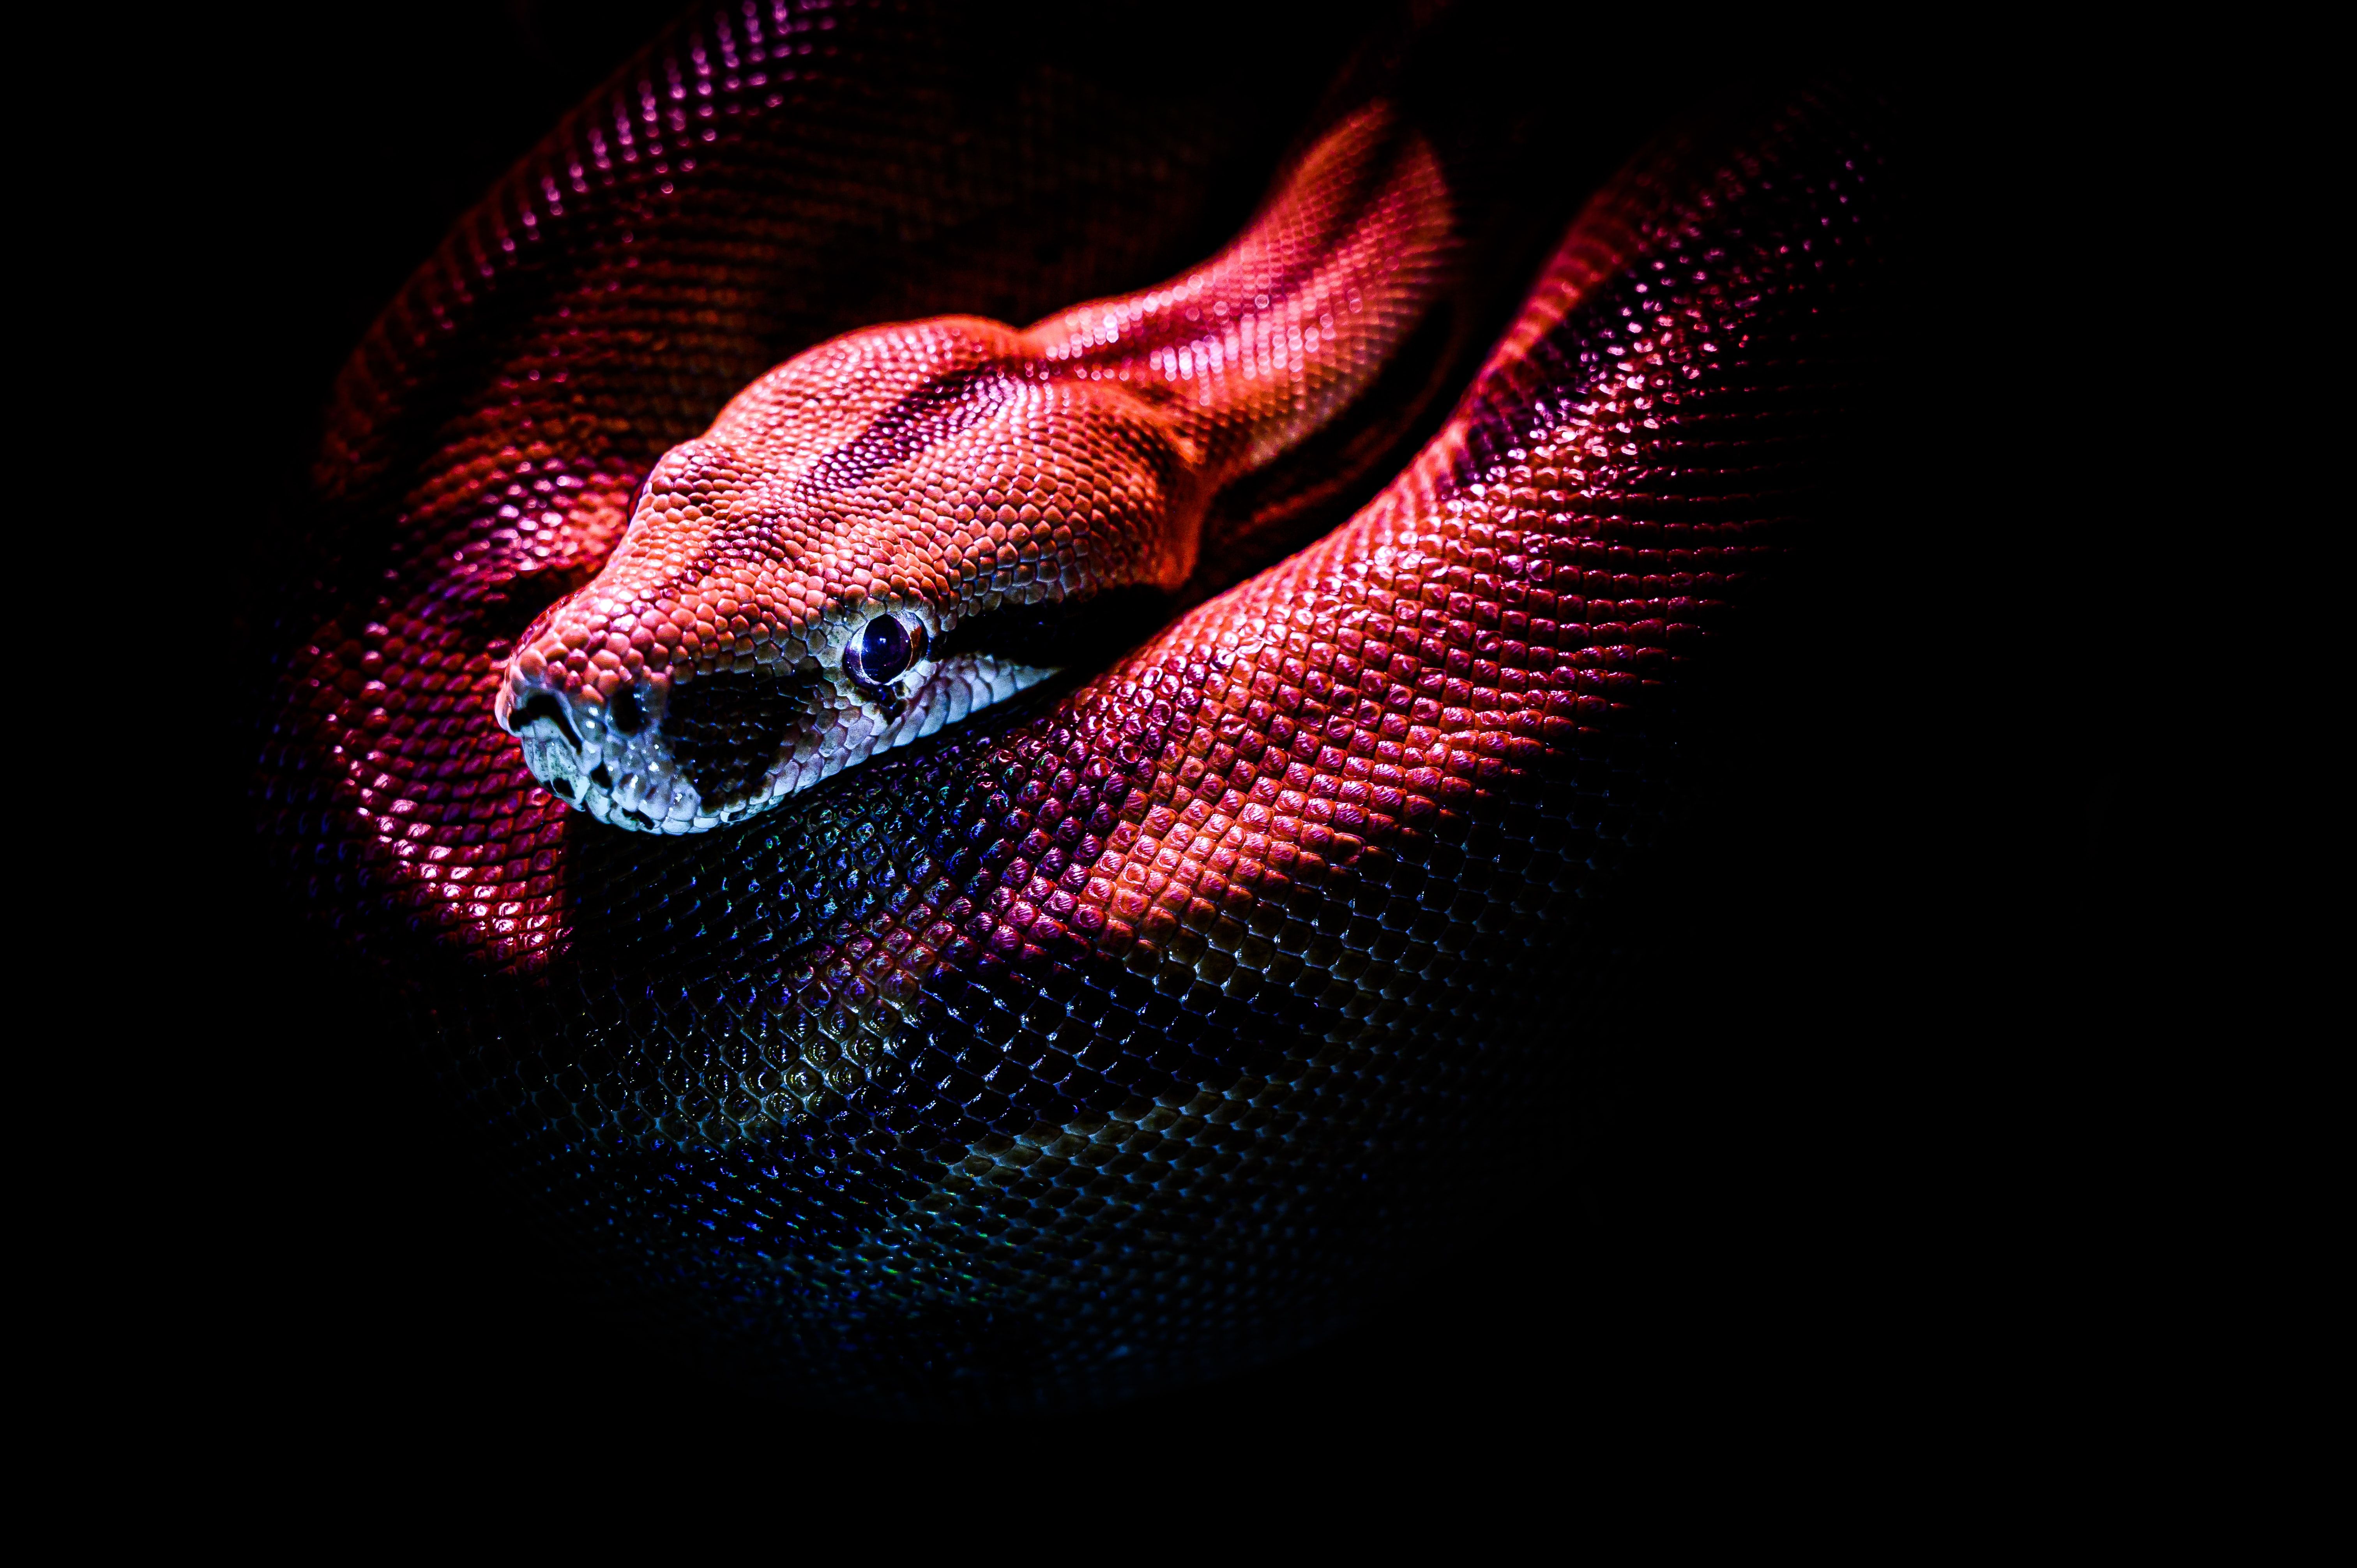 Snake Picture. Download Free Image